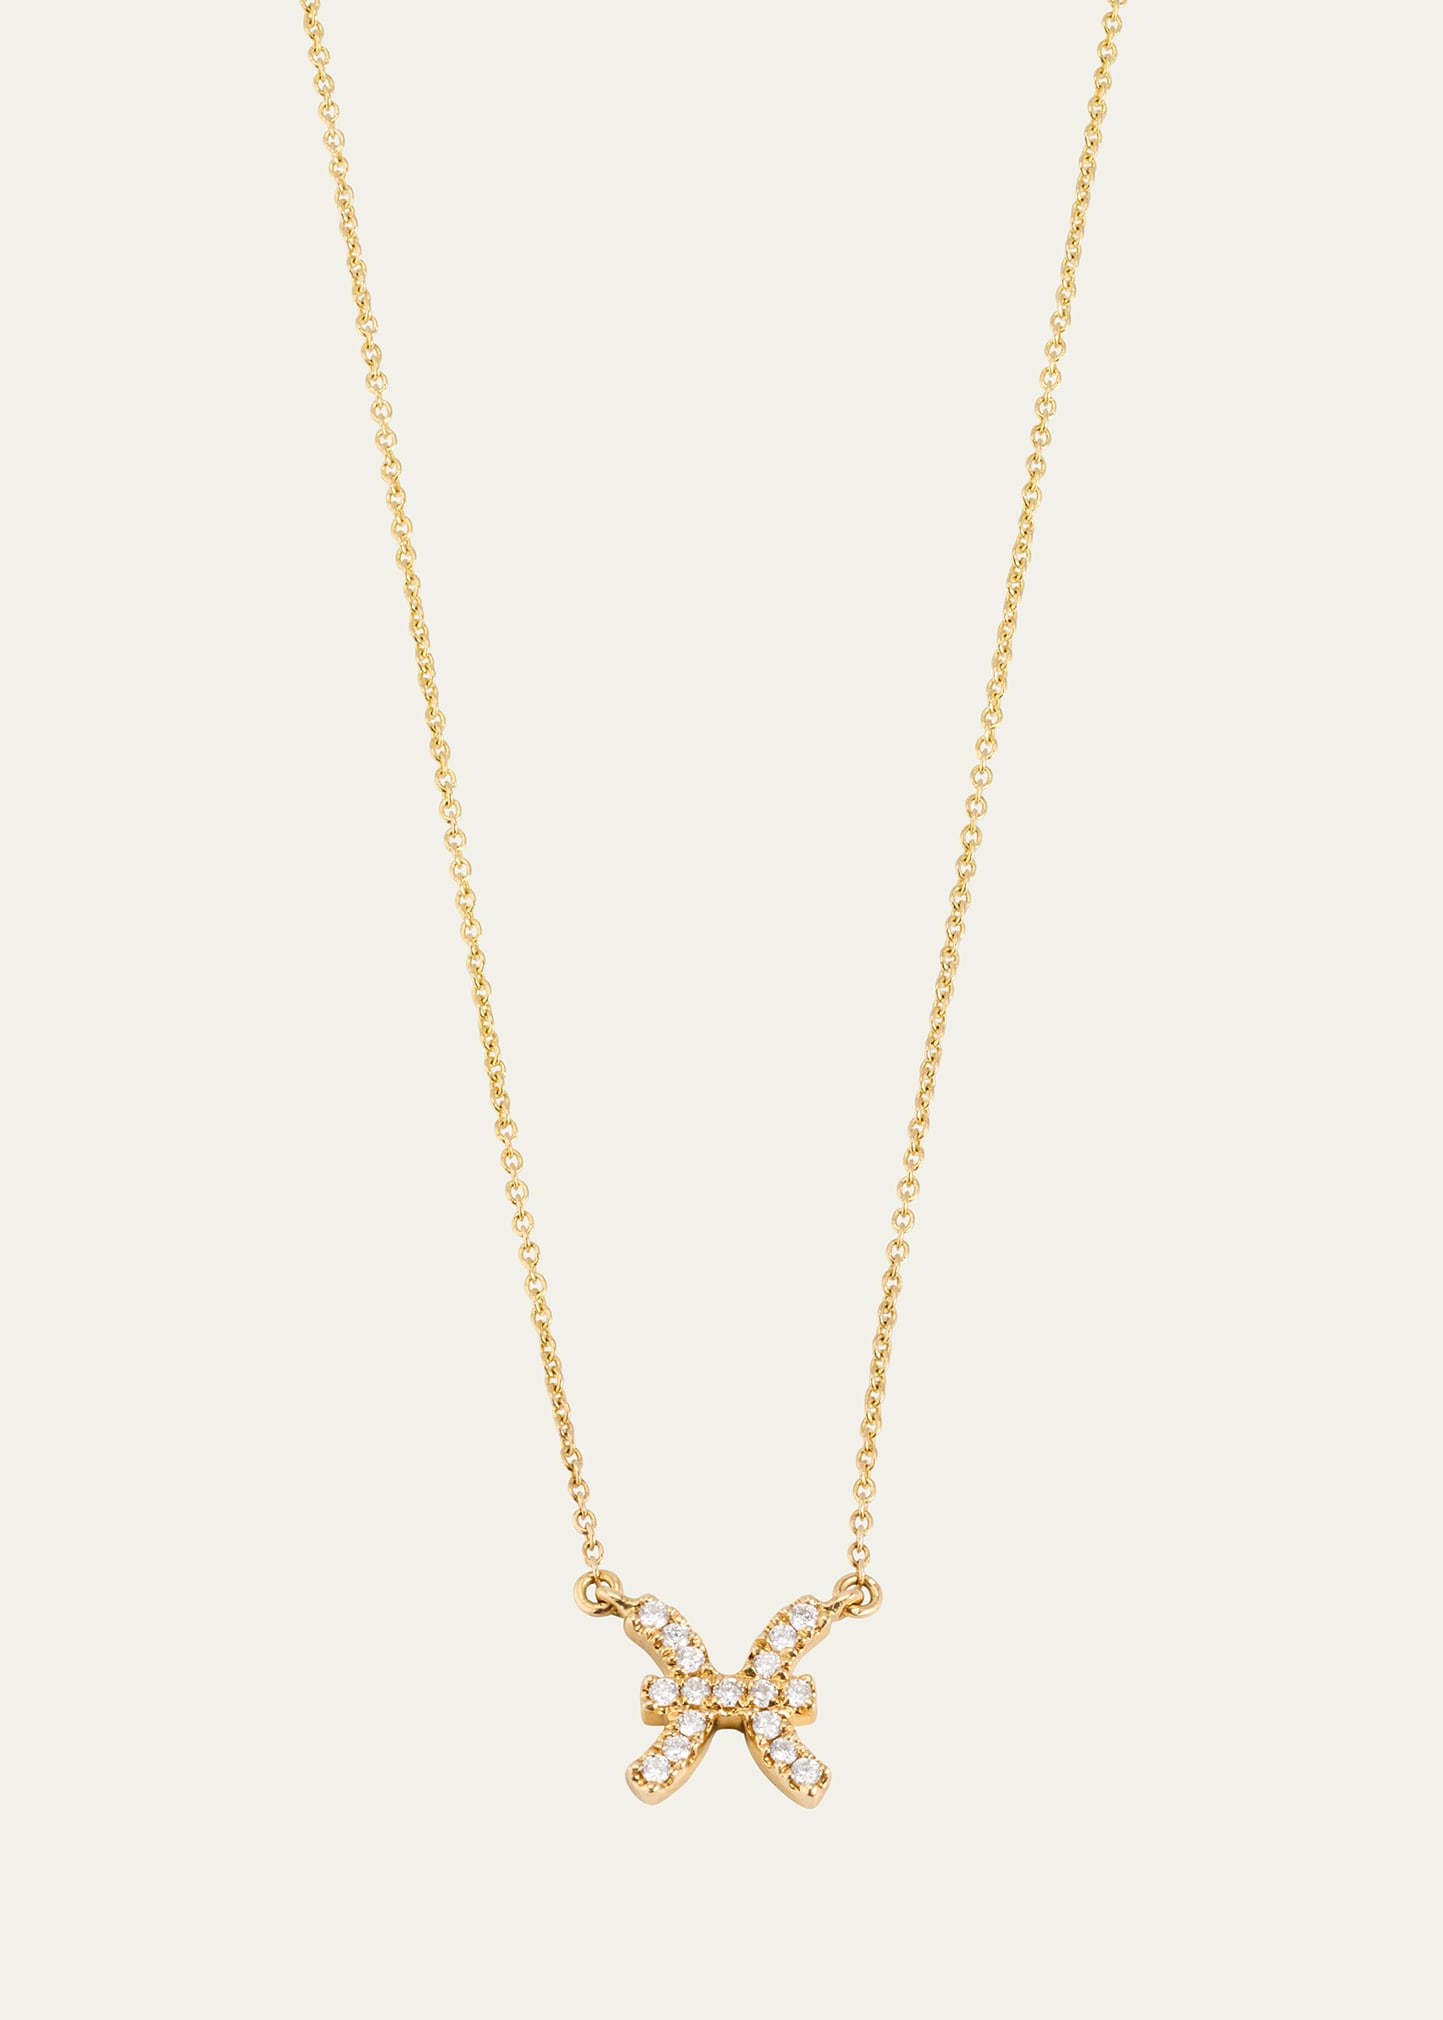 Star Sign Necklace, Pisces, in Yellow Gold and White Diamonds